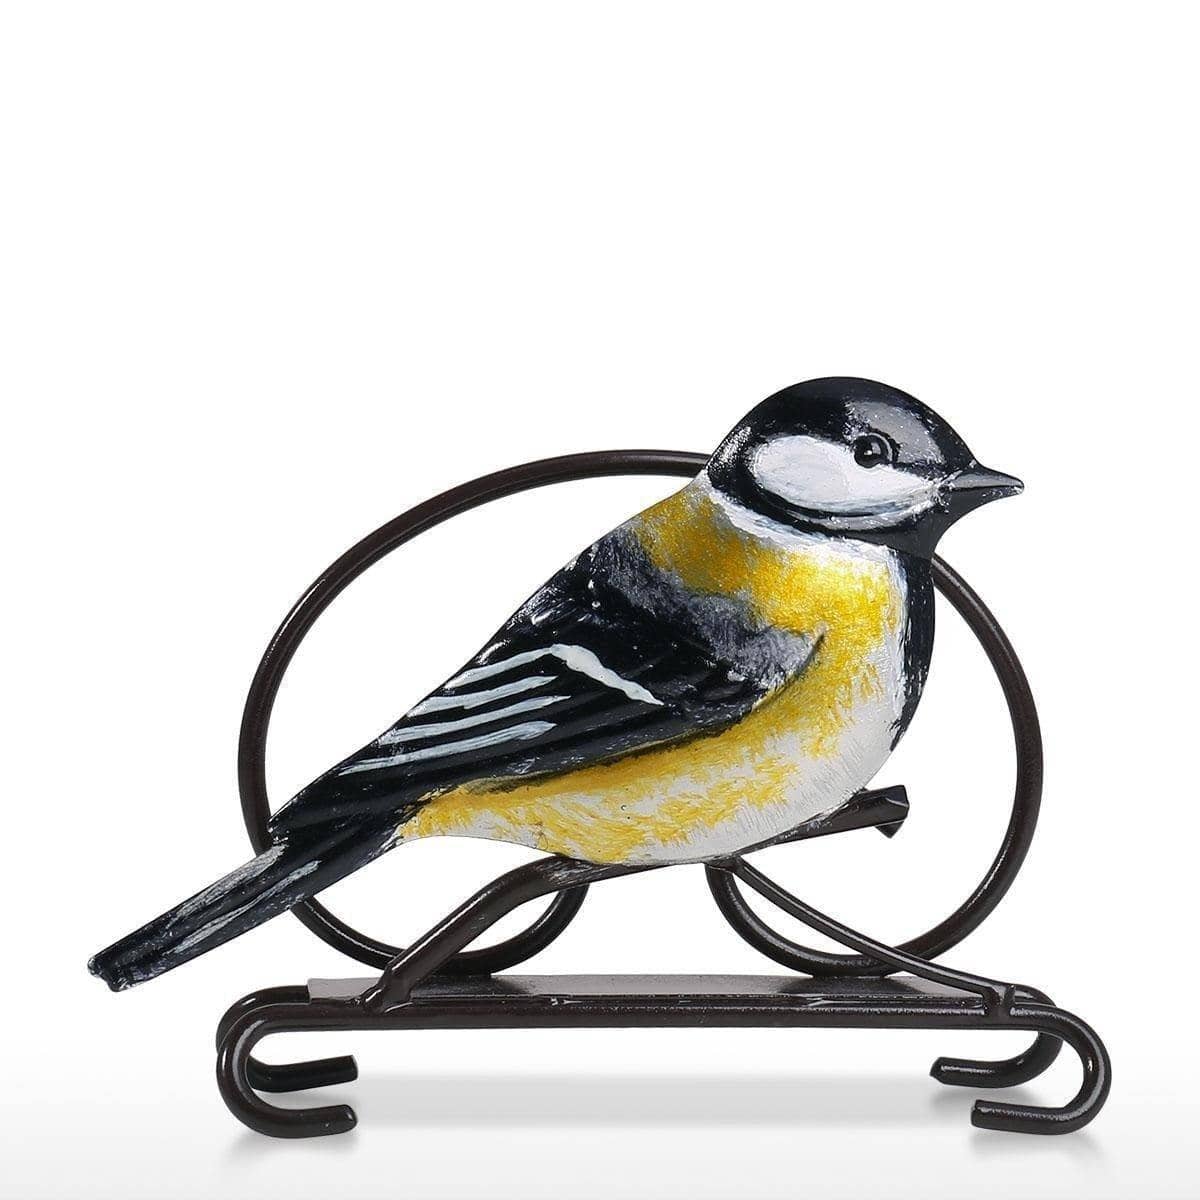 Bird Tissue Paper Napkin Holder - Cute and Practical Table Decor